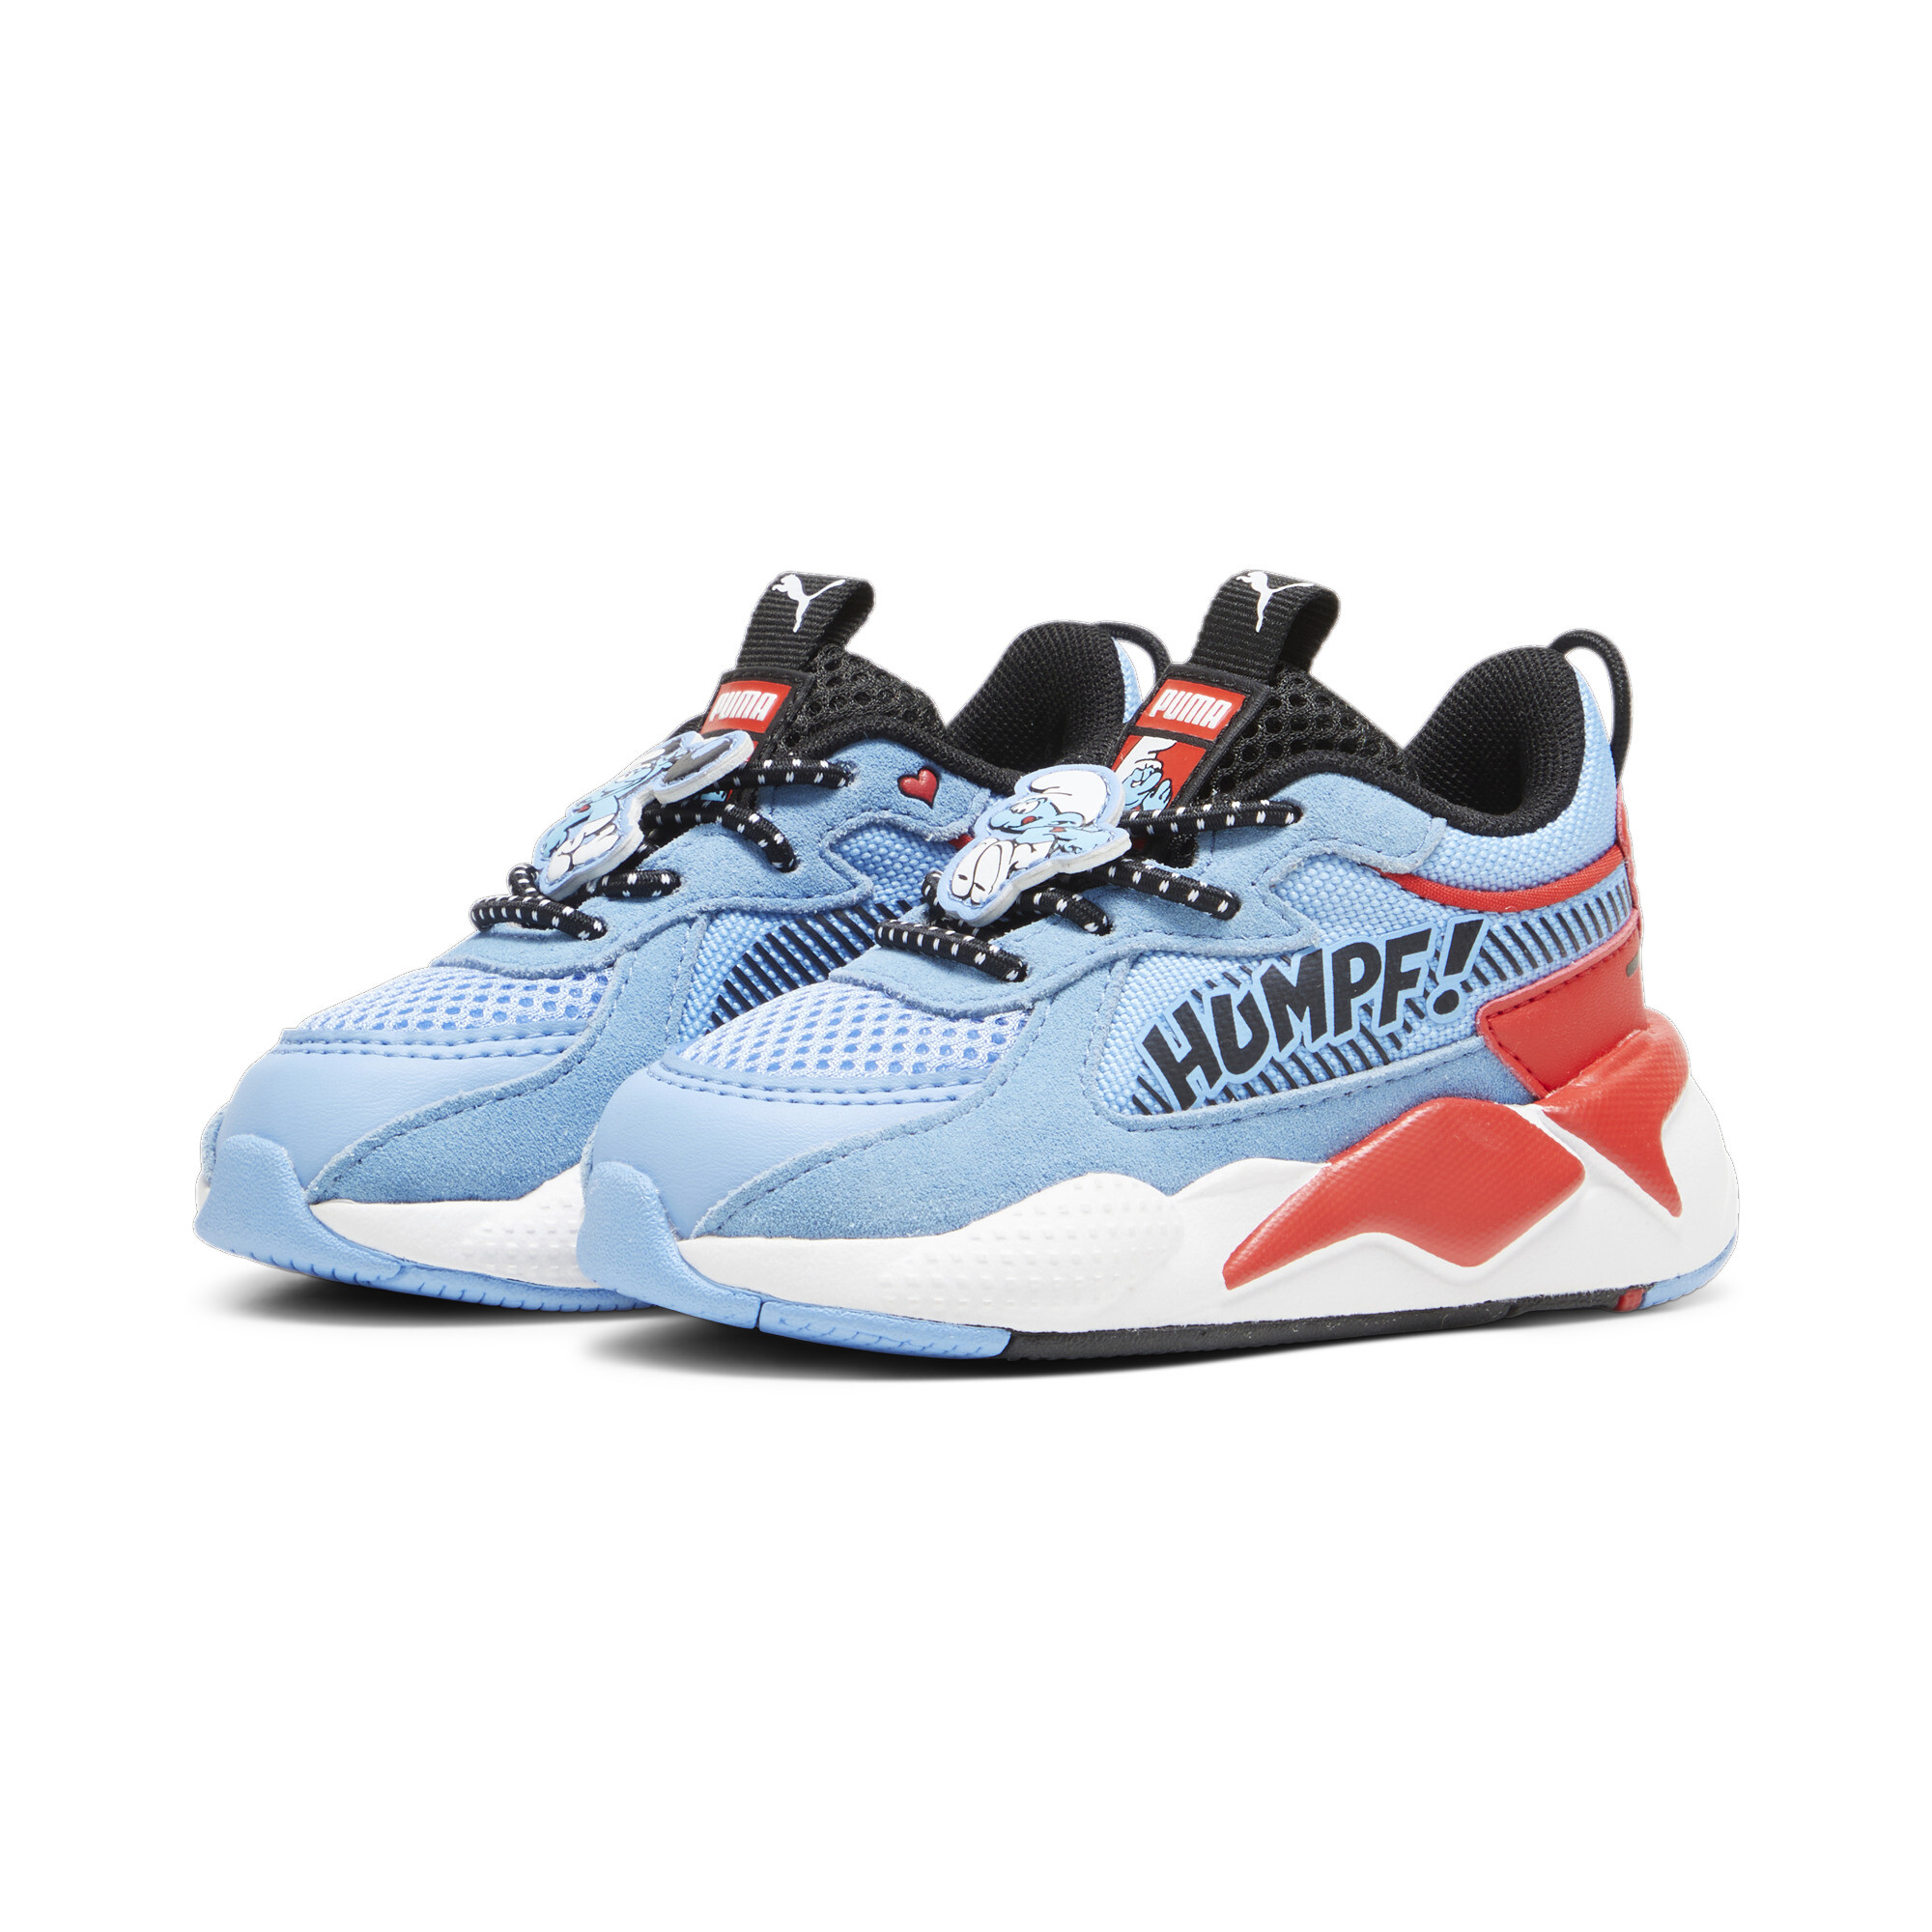 Kids' PUMA X THE SMURFS RS-X Toddlers' Sneakers In Blue, Size EU 22